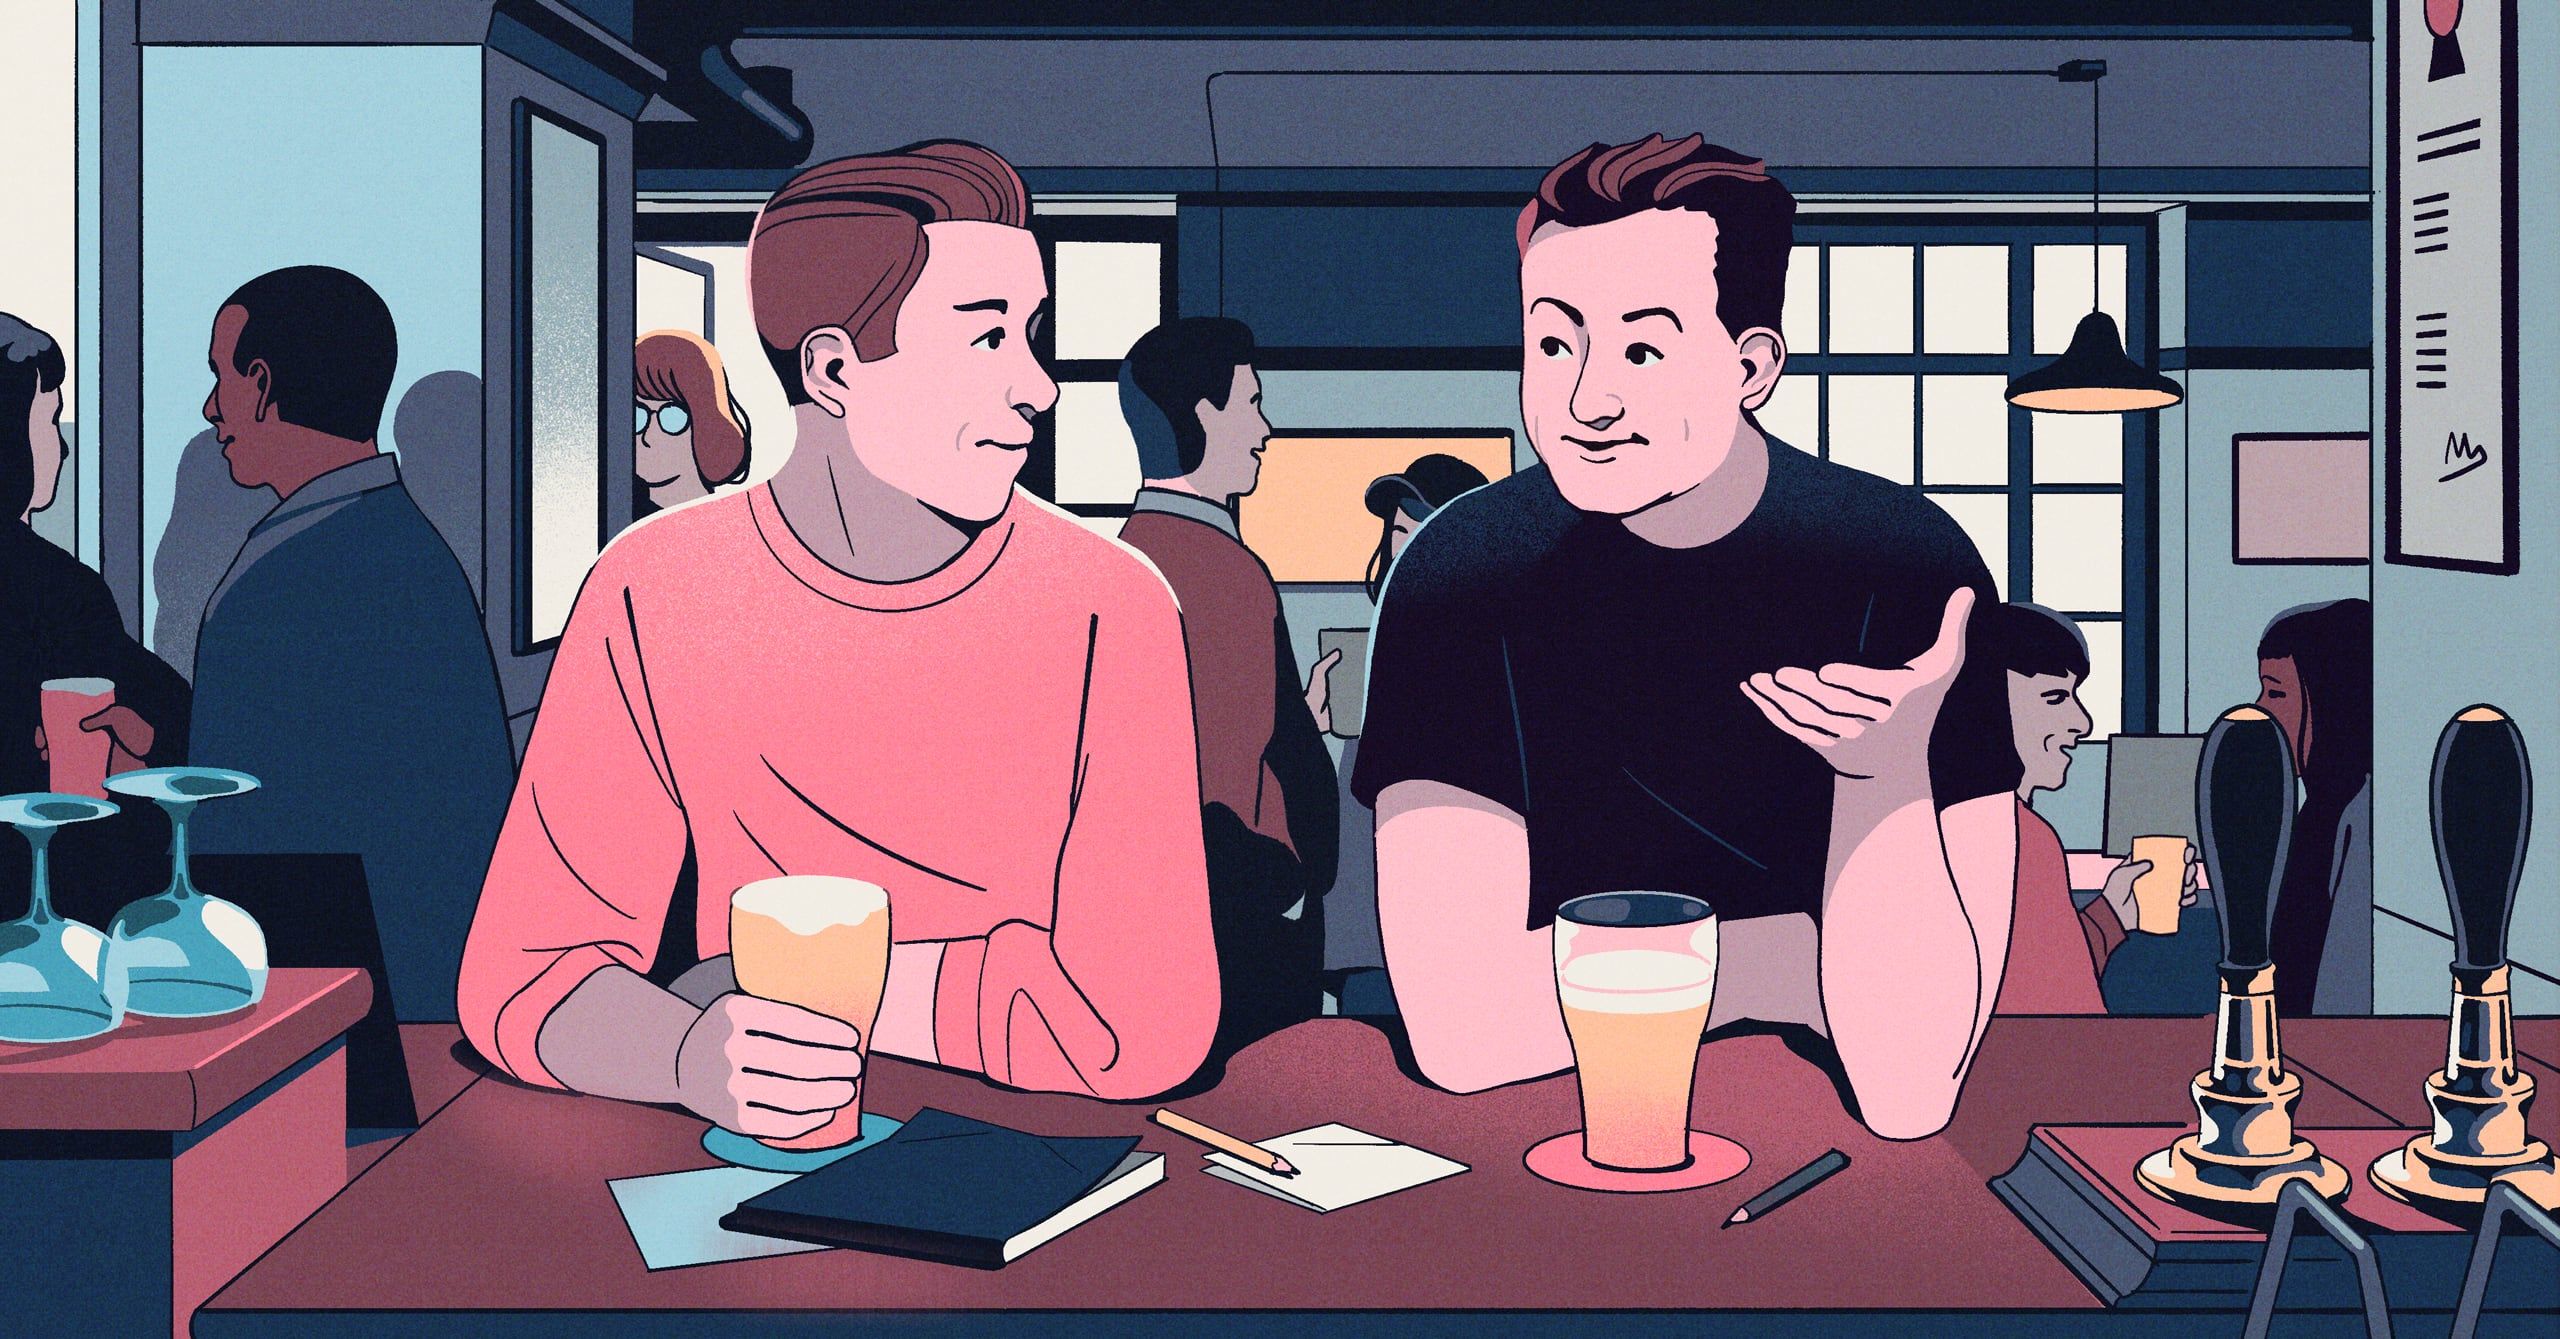 Illustration of founders drinking beers at bar